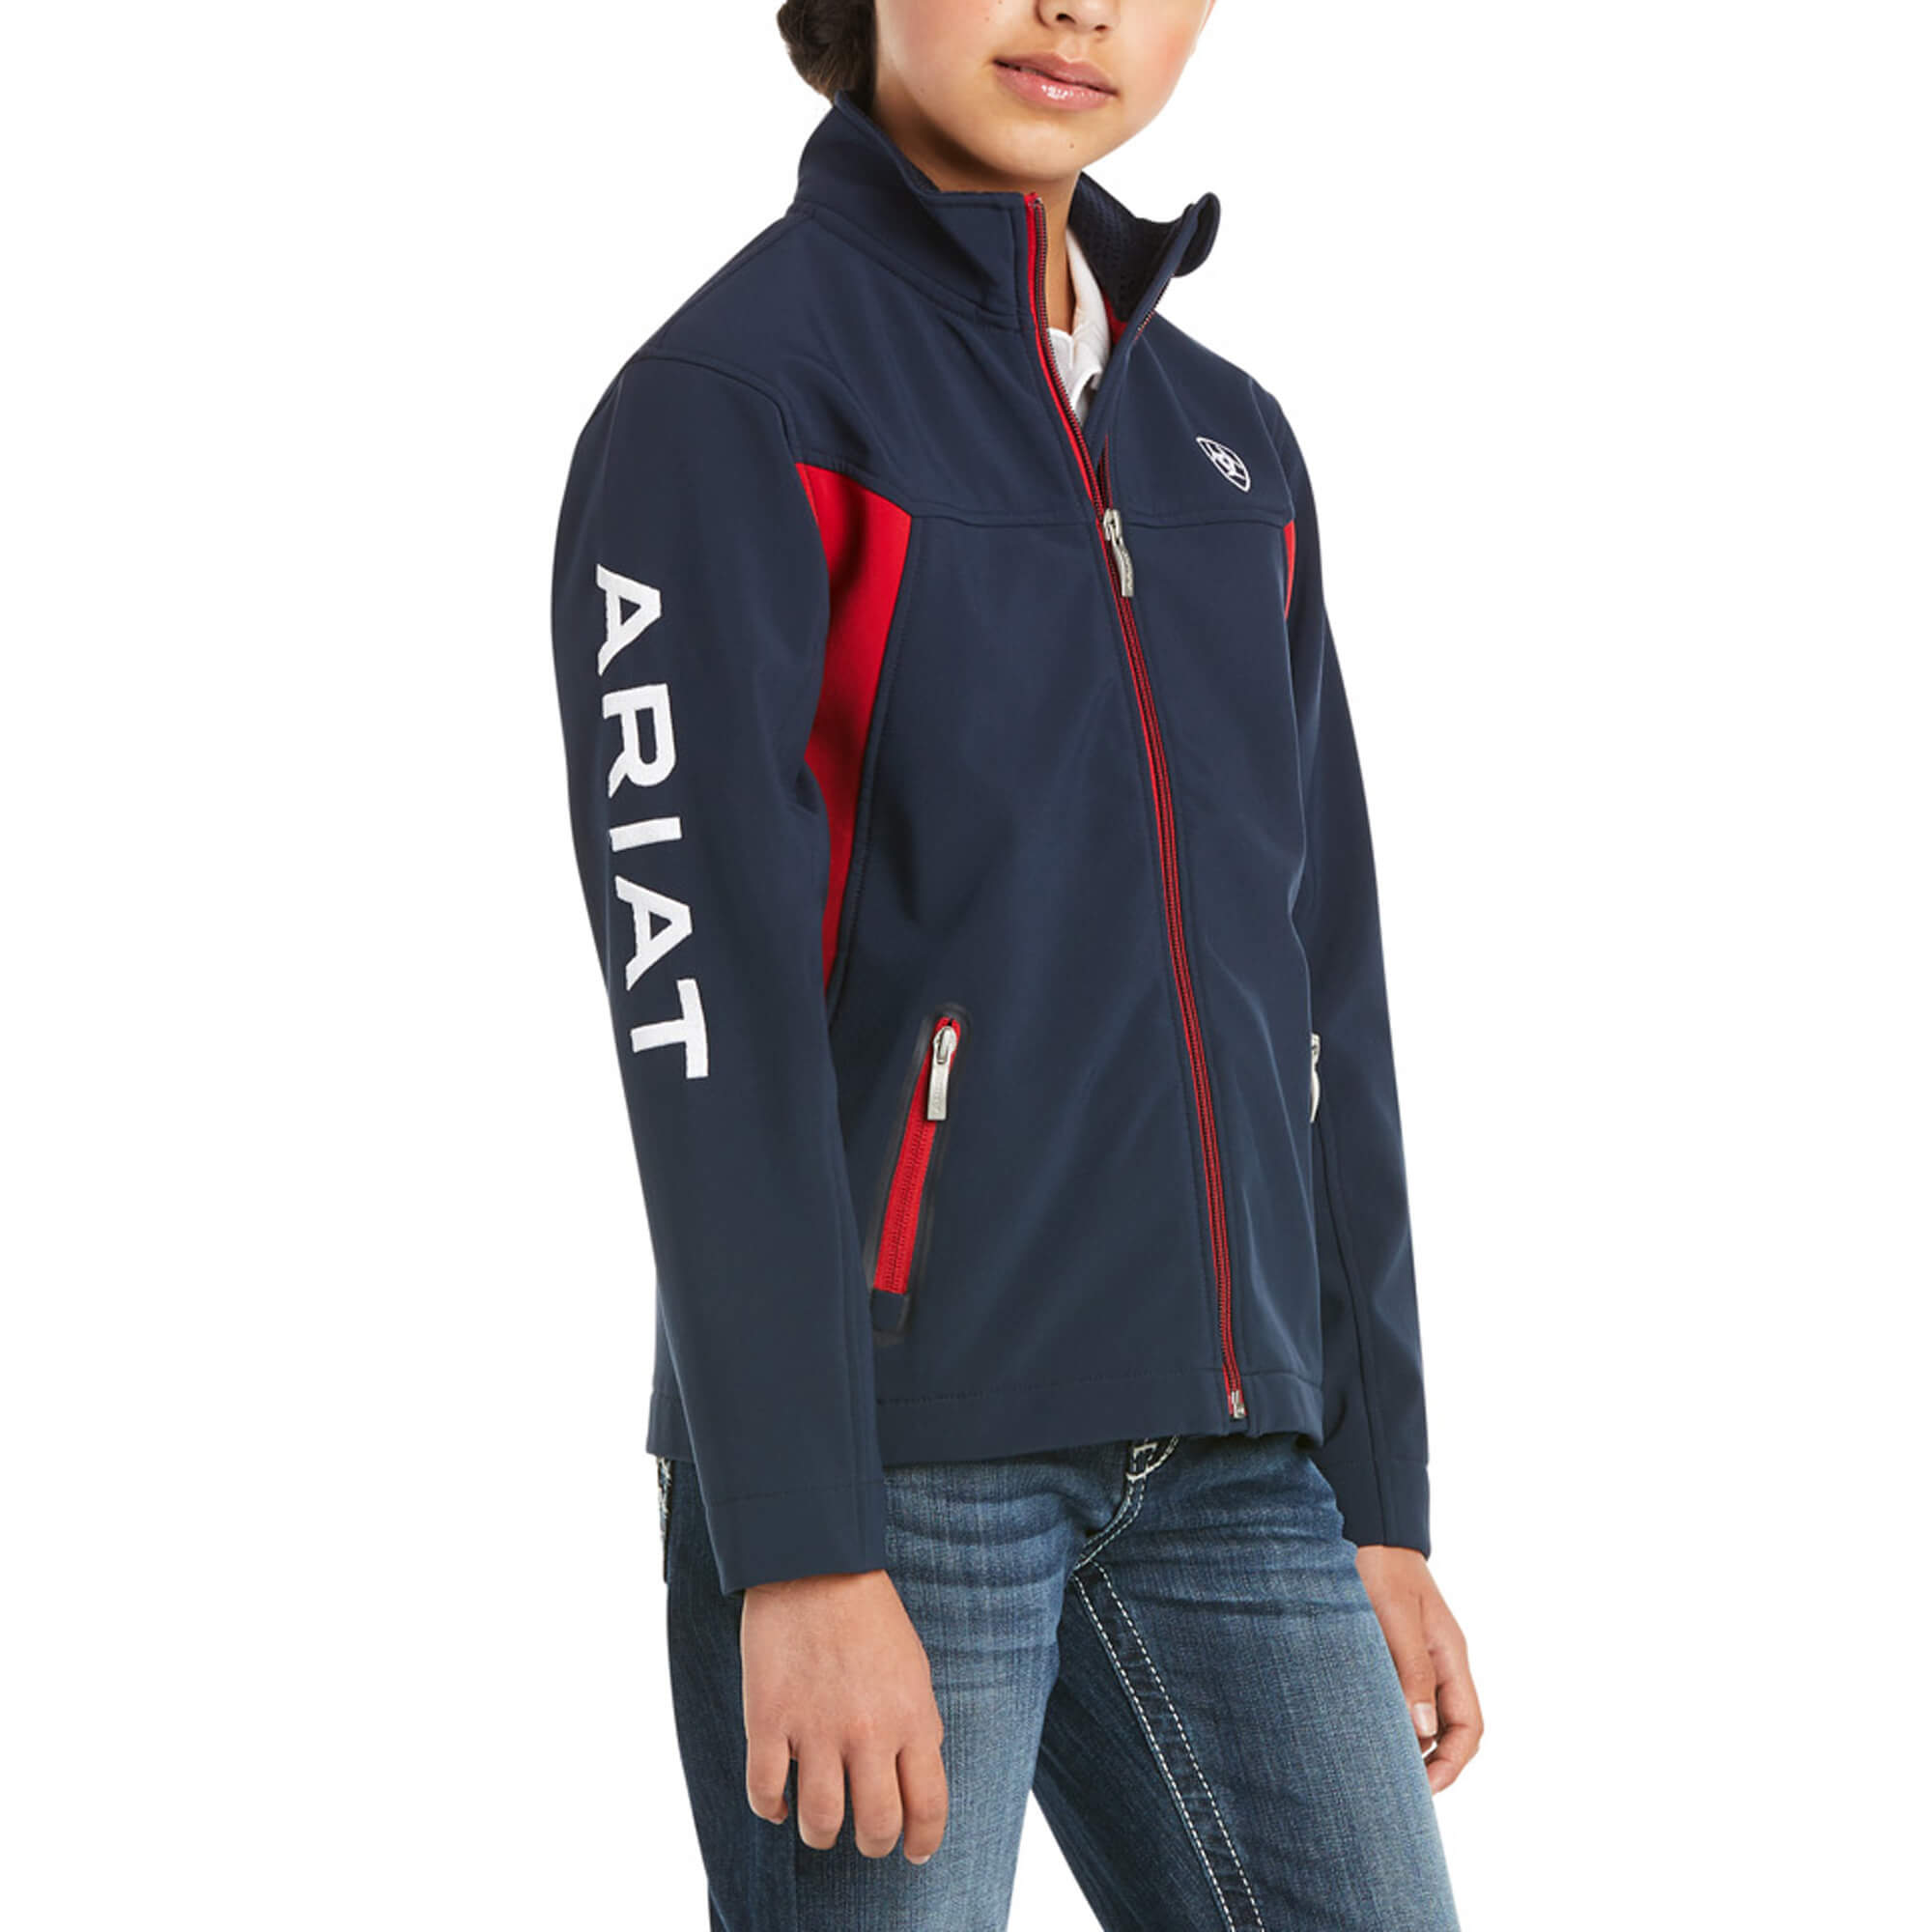 Ariat Women's Rebar DuraCanvas Insulated Work Jacket at Tractor Supply Co.